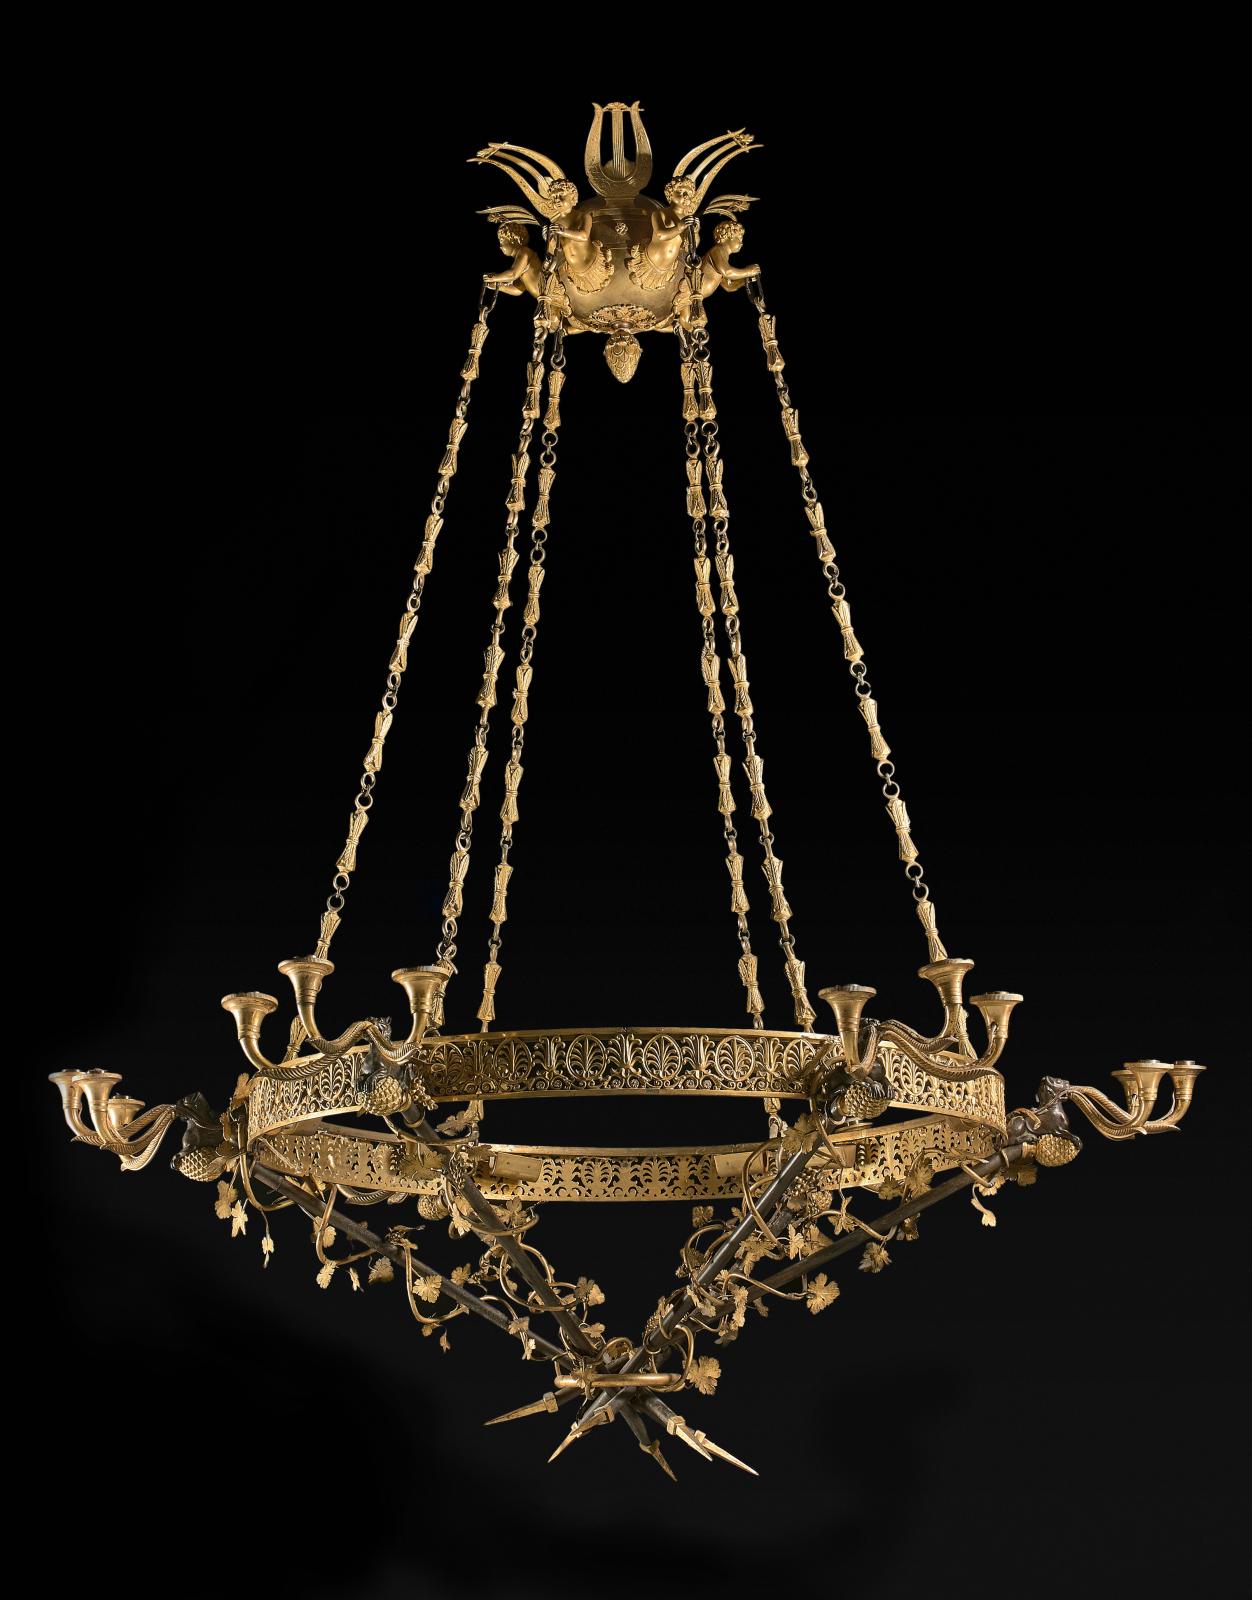 €82,160 Attributed to Jean-Pierre Lancry, Russia, early 19th century, 18-branch chandelier in patinated gilt bronze with openwork crown featuring palm